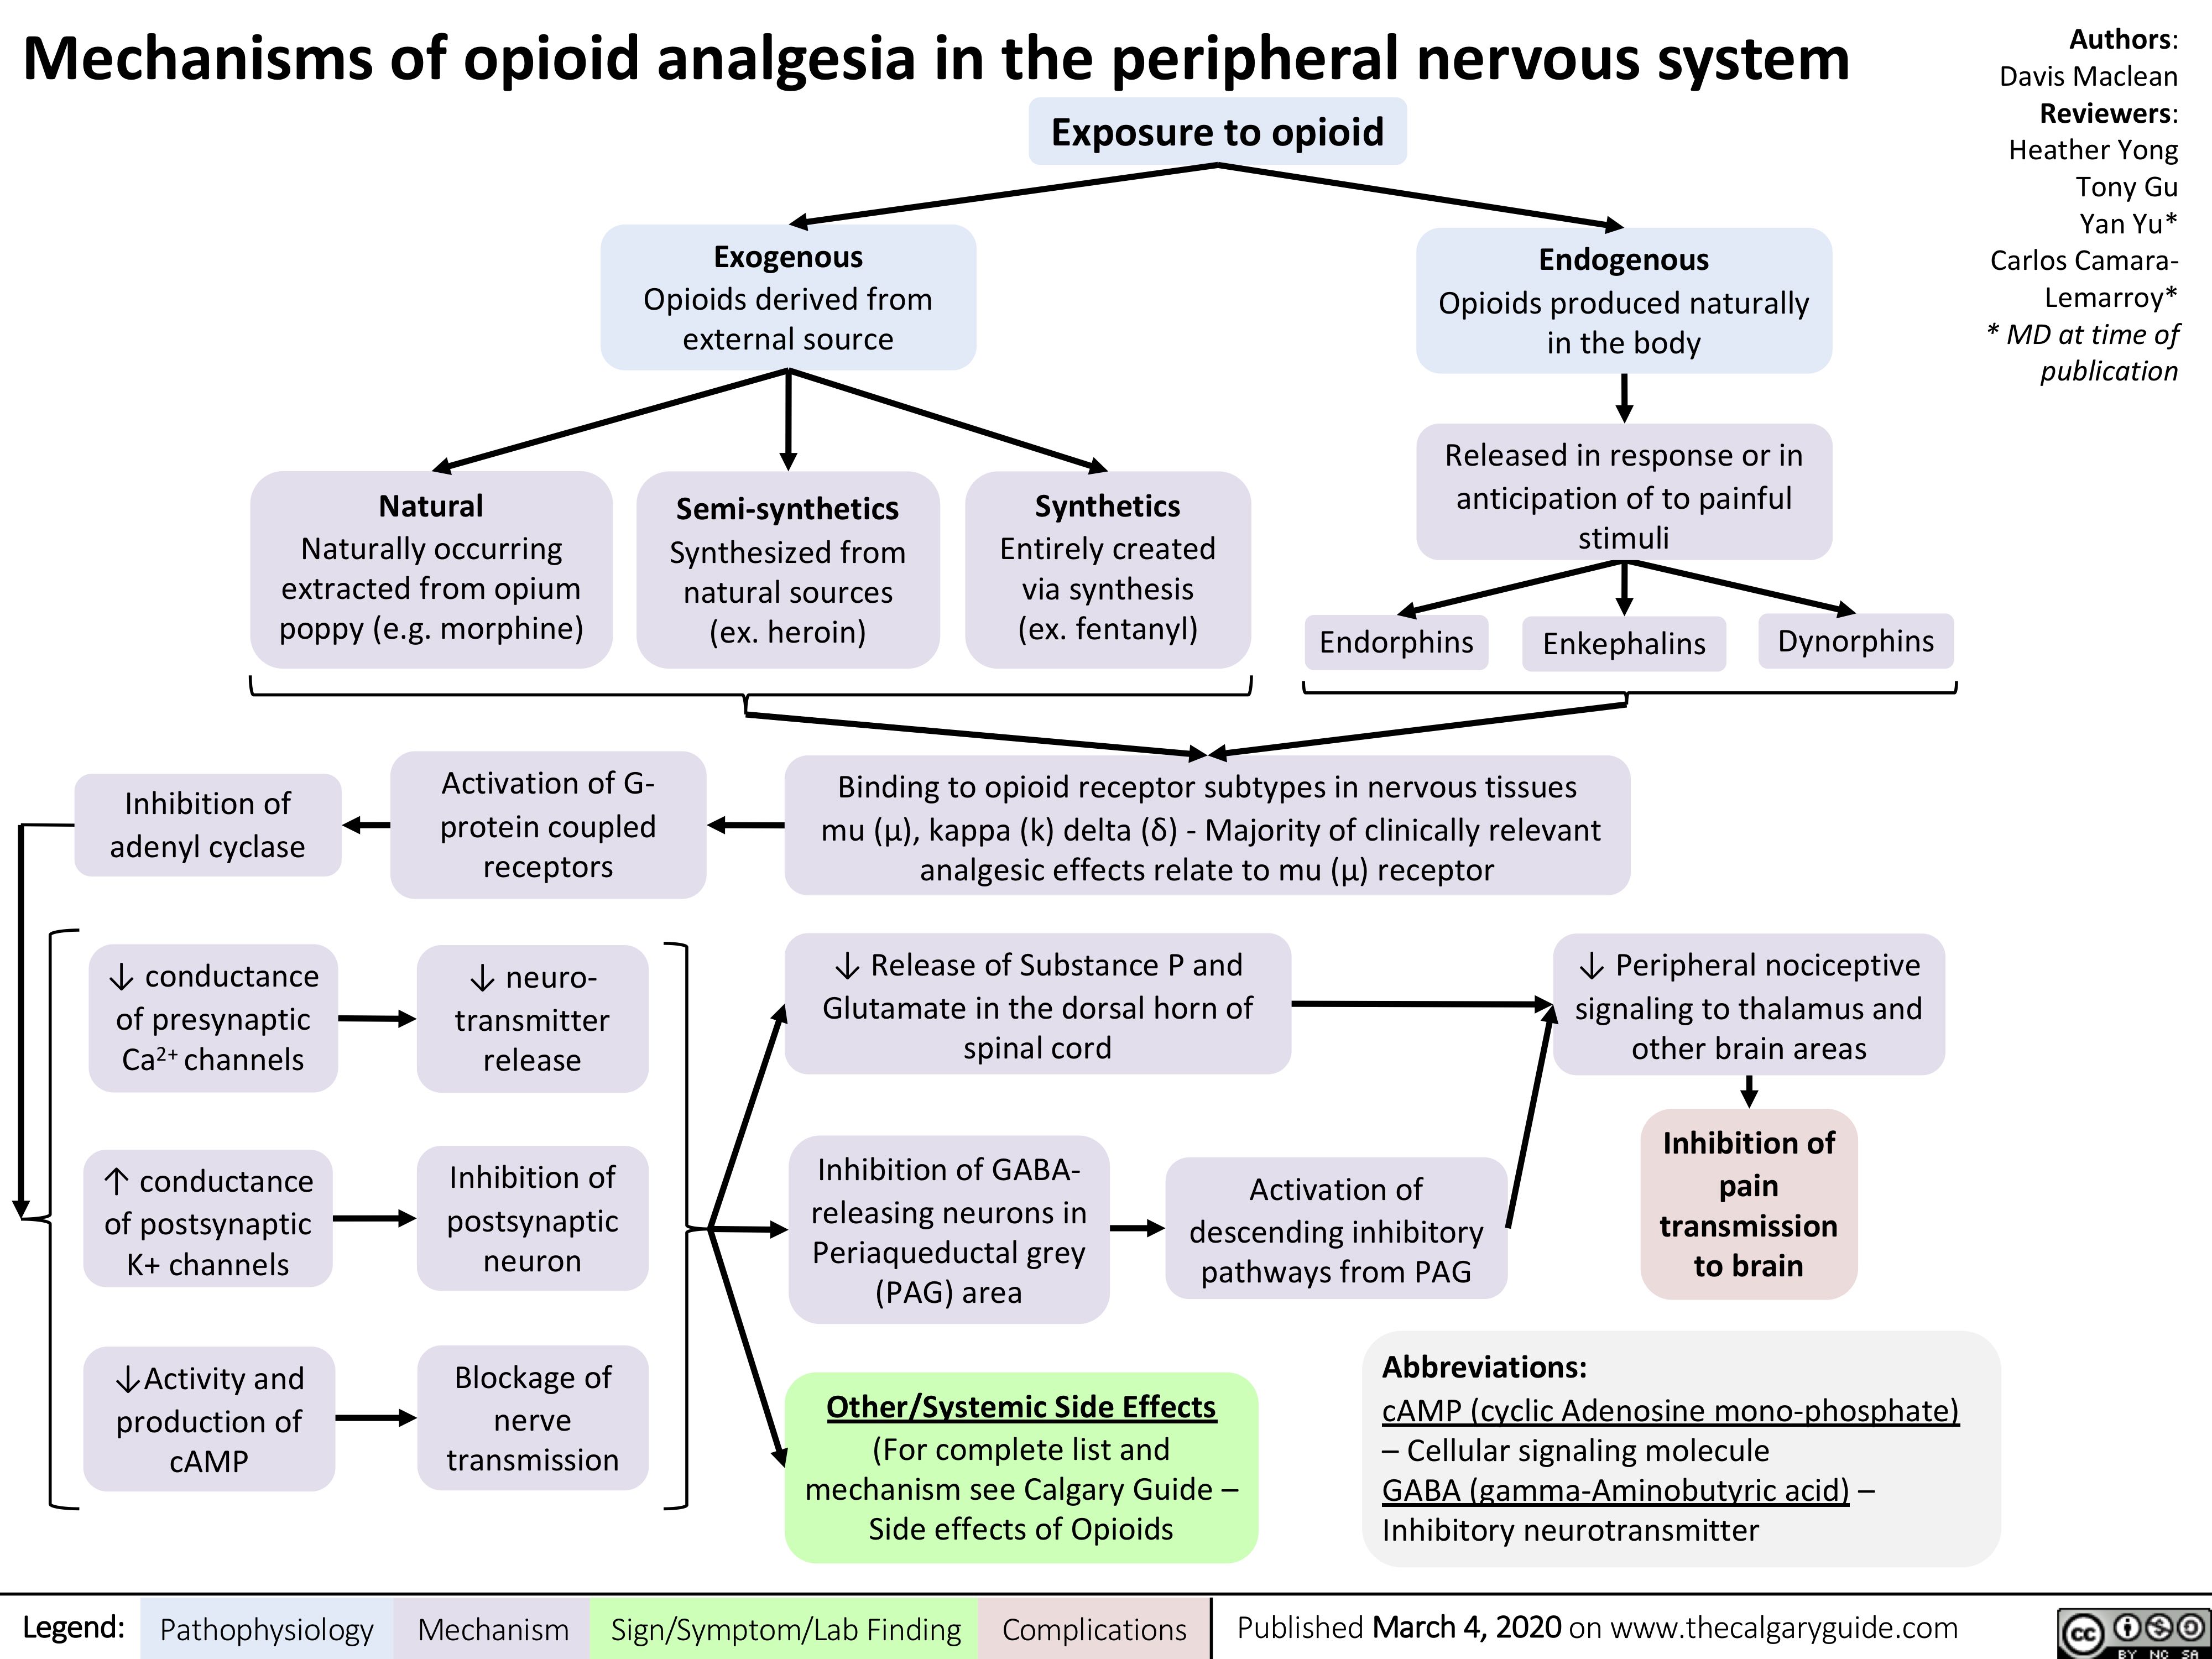 Mechanisms of opioid analgesia in the peripheral nervous system
Authors: Davis Maclean Reviewers: Heather Yong Tony Gu Yan Yu* Carlos Camara- Lemarroy* * MD at time of publication
 Exposure to opioid
         Natural
Naturally occurring extracted from opium poppy (e.g. morphine)
Exogenous
Opioids derived from external source
Semi-synthetics
Synthesized from natural sources (ex. heroin)
Synthetics
Entirely created via synthesis (ex. fentanyl)
Endogenous
Opioids produced naturally in the body
Released in response or in anticipation of to painful stimuli
   Endorphins
Enkephalins
Dynorphins
     Inhibition of adenyl cyclase
↓ conductance of presynaptic Ca2+ channels
↑ conductance of postsynaptic K+ channels
↓Activity and production of cAMP
Activation of G- protein coupled receptors
↓ neuro- transmitter release
Inhibition of postsynaptic neuron
Blockage of nerve transmission
Binding to opioid receptor subtypes in nervous tissues mu (μ), kappa (k) delta (δ) - Majority of clinically relevant analgesic effects relate to mu (μ) receptor
        ↓ Release of Substance P and Glutamate in the dorsal horn of spinal cord
↓ Peripheral nociceptive signaling to thalamus and other brain areas
Inhibition of pain transmission to brain
          Inhibition of GABA- releasing neurons in Periaqueductal grey (PAG) area
Activation of descending inhibitory pathways from PAG
          Other/Systemic Side Effects
(For complete list and mechanism see Calgary Guide – Side effects of Opioids
Abbreviations:
cAMP (cyclic Adenosine mono-phosphate) – Cellular signaling molecule
GABA (gamma-Aminobutyric acid) – Inhibitory neurotransmitter
     Legend:
 Pathophysiology
Mechanism
Sign/Symptom/Lab Finding
  Complications
Published March 4, 2020 on www.thecalgaryguide.com
    